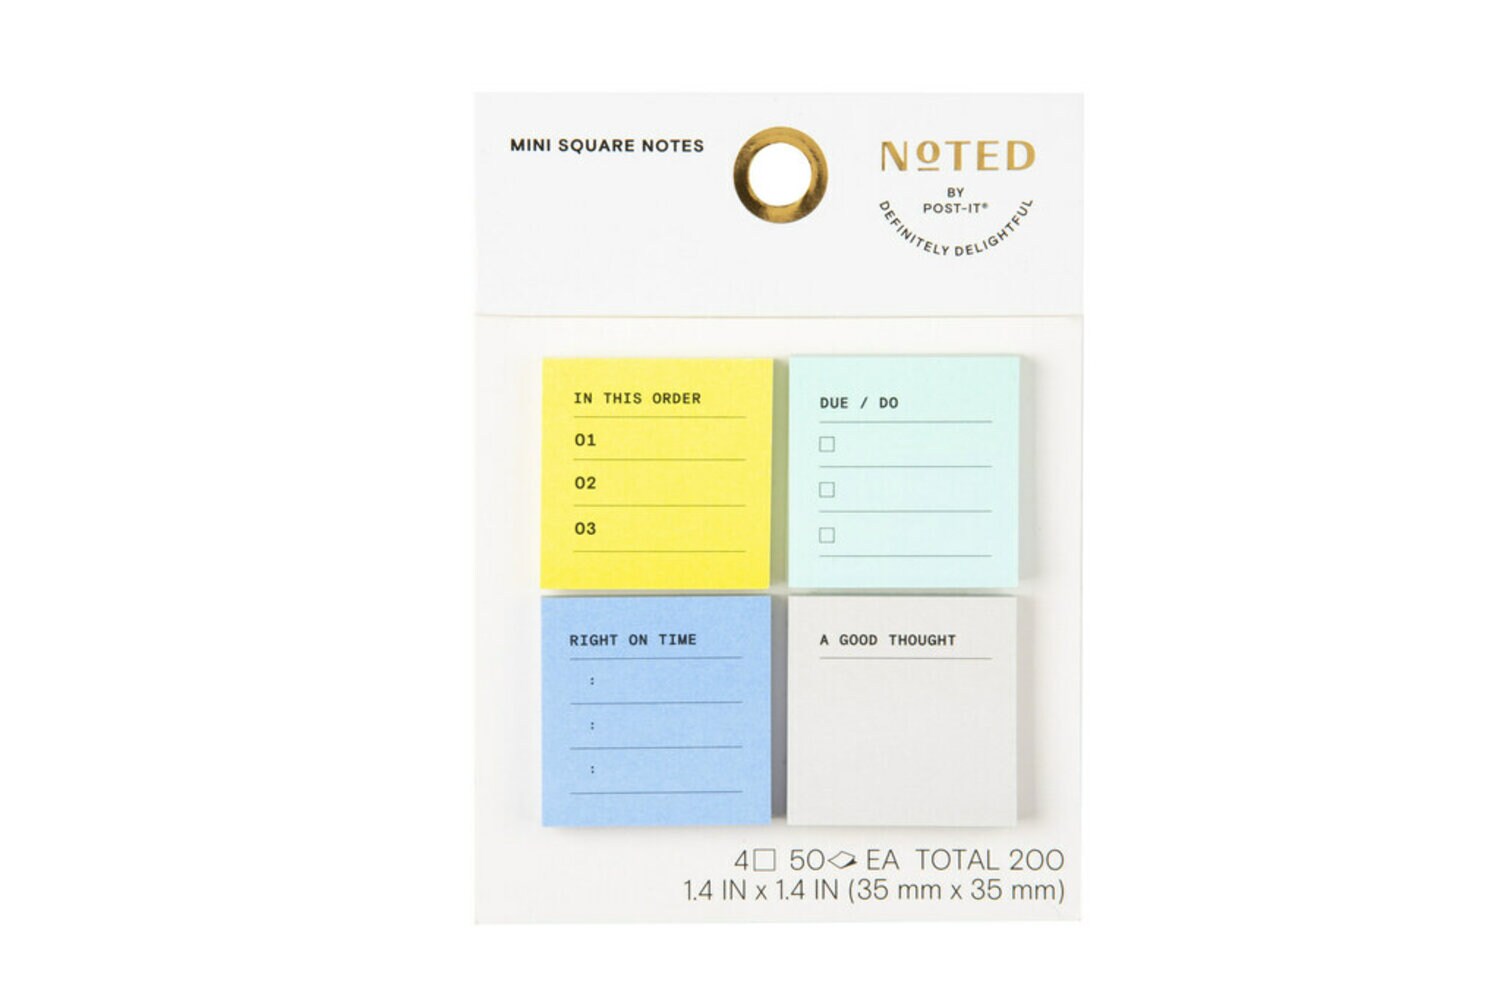 7100264973 - Post-it Printed Notes NTD5-MINI-CL, 1.4 in x 1.4 in (35 mm x 35 mm)